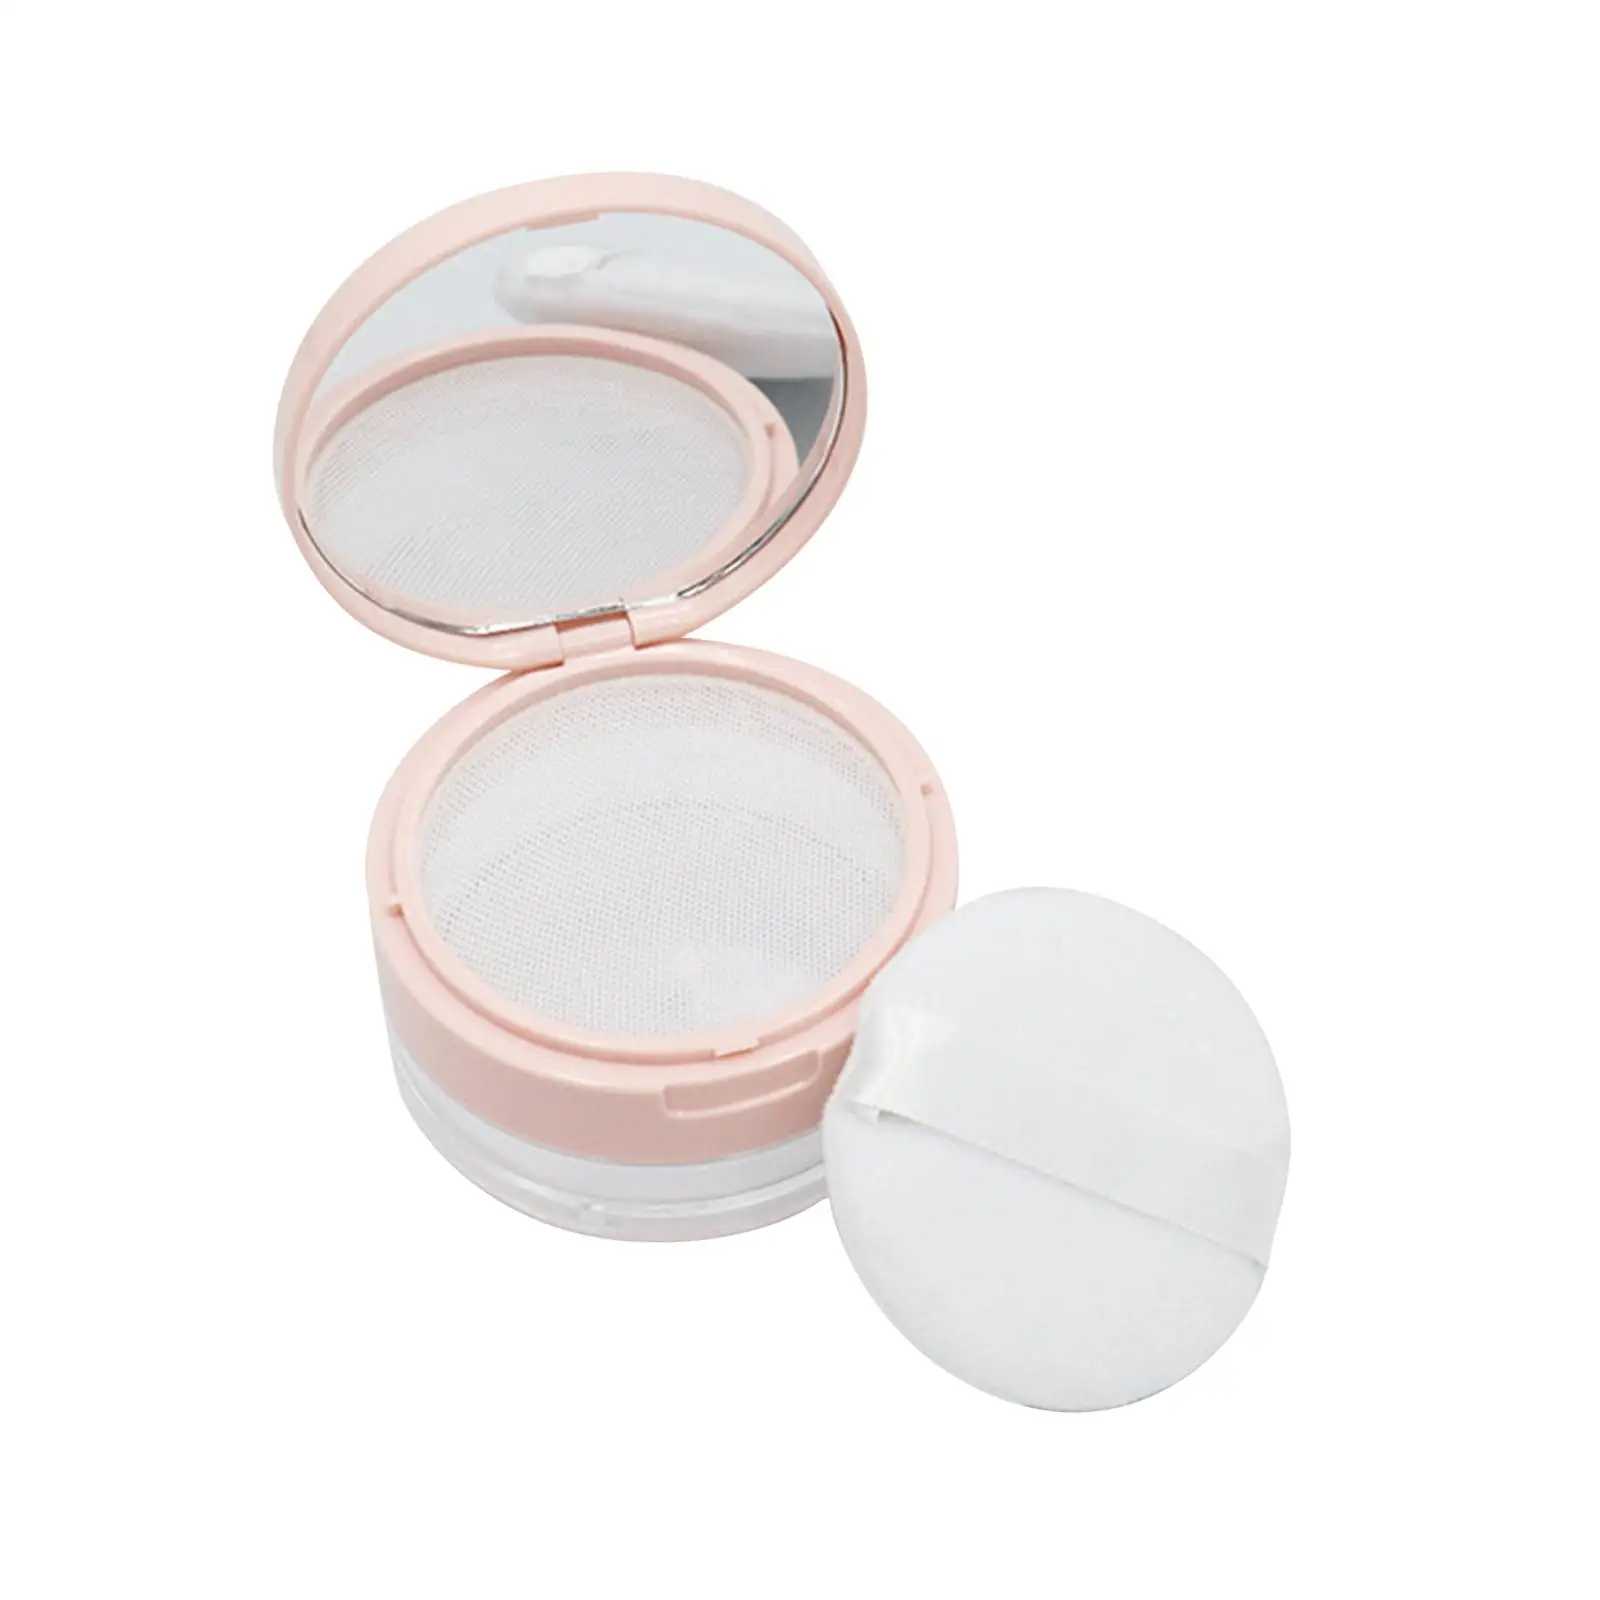 Empty Loose Face Powder Case with Sifter Powder Box Compact 20G Refillable Makeup Powder Container